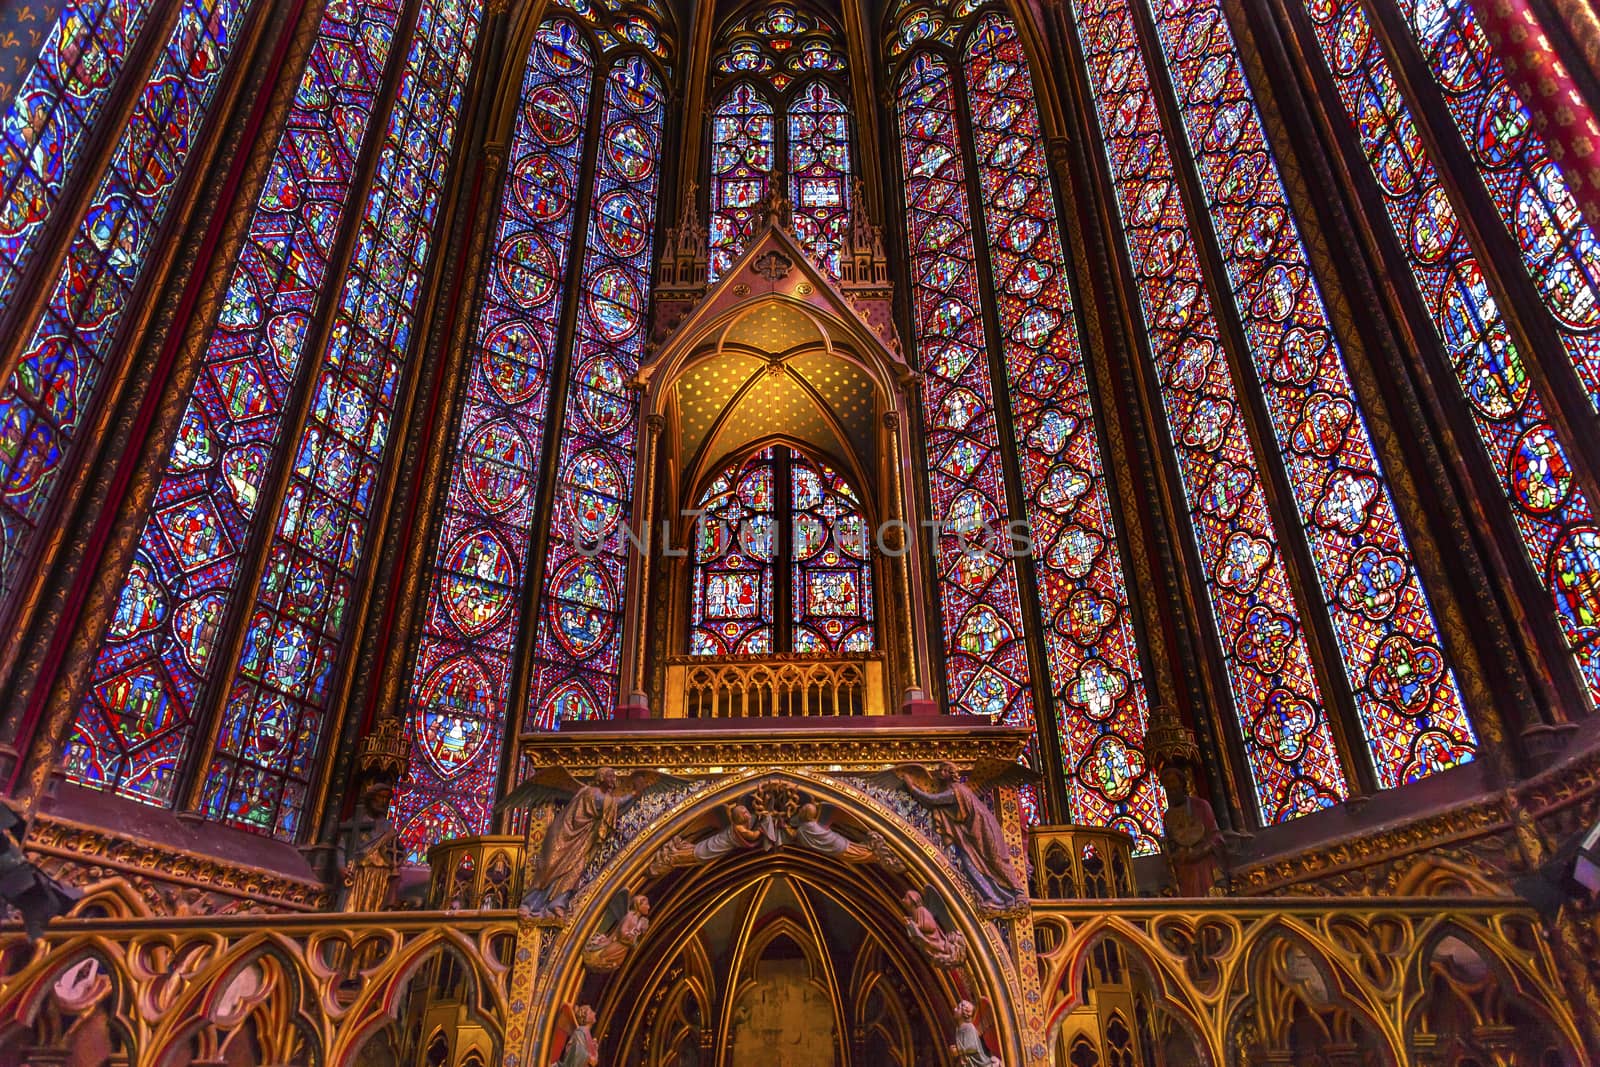 Stained Glass Cathedral Altar Arch Saint Chapelle Paris France.  Saint King Louis 9th created Sainte Chappel in 1248 to house Christian relics, including Christ's Crown of Thorns.  Stained Glass created in the 13th Century and shows various biblical stories along wtih stories from 1200s.